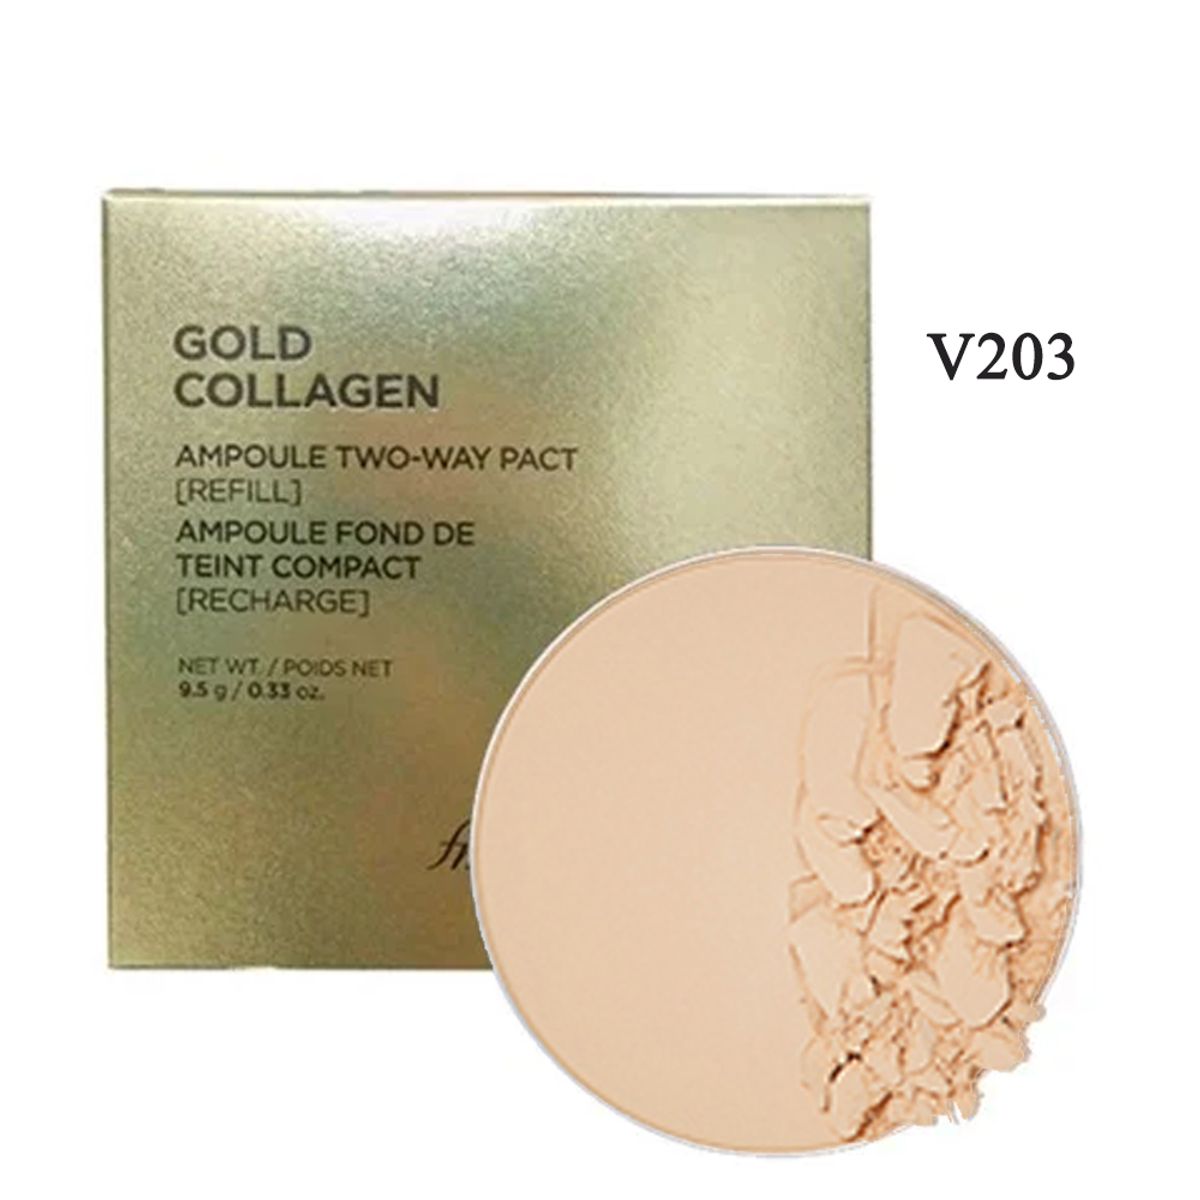 fmgt-loi-phan-nen-che-khuyet-diem-thefaceshop-gold-collagen-ampoule-two-way-pact-spf30-pa-refill-3